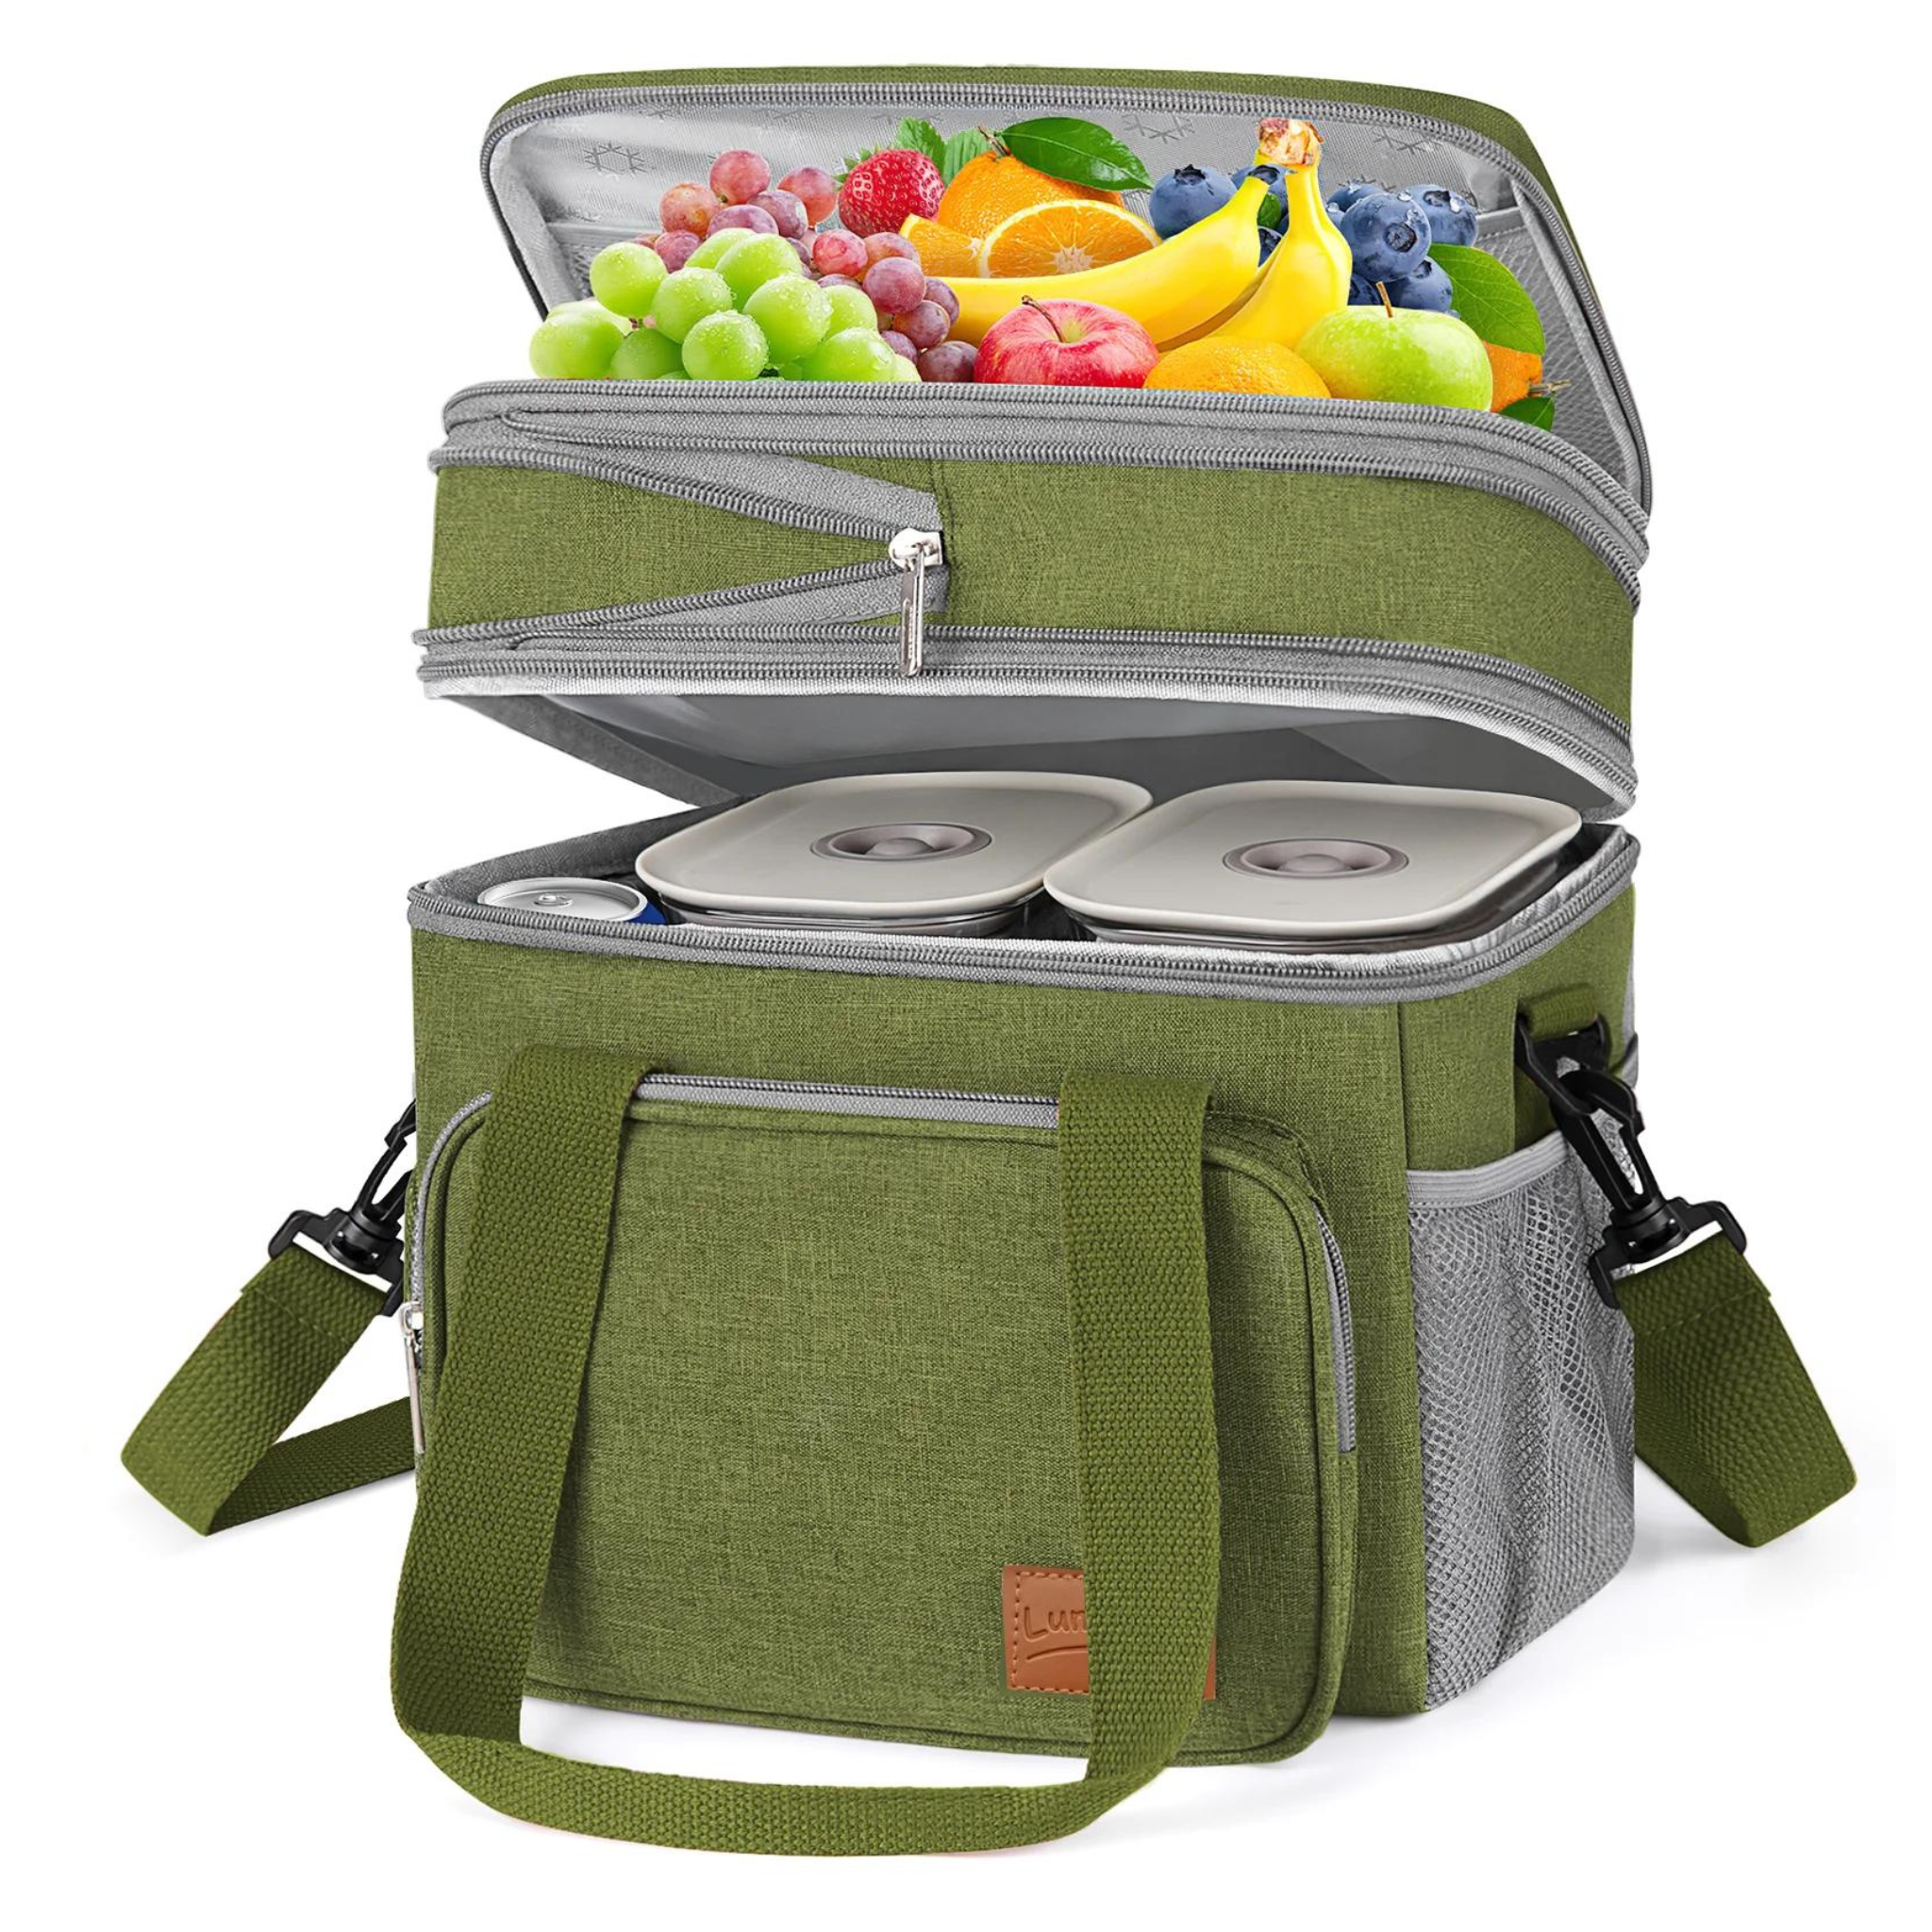 Insulated Expandable Double Deck Lunch Tote Bag (4 Colors)